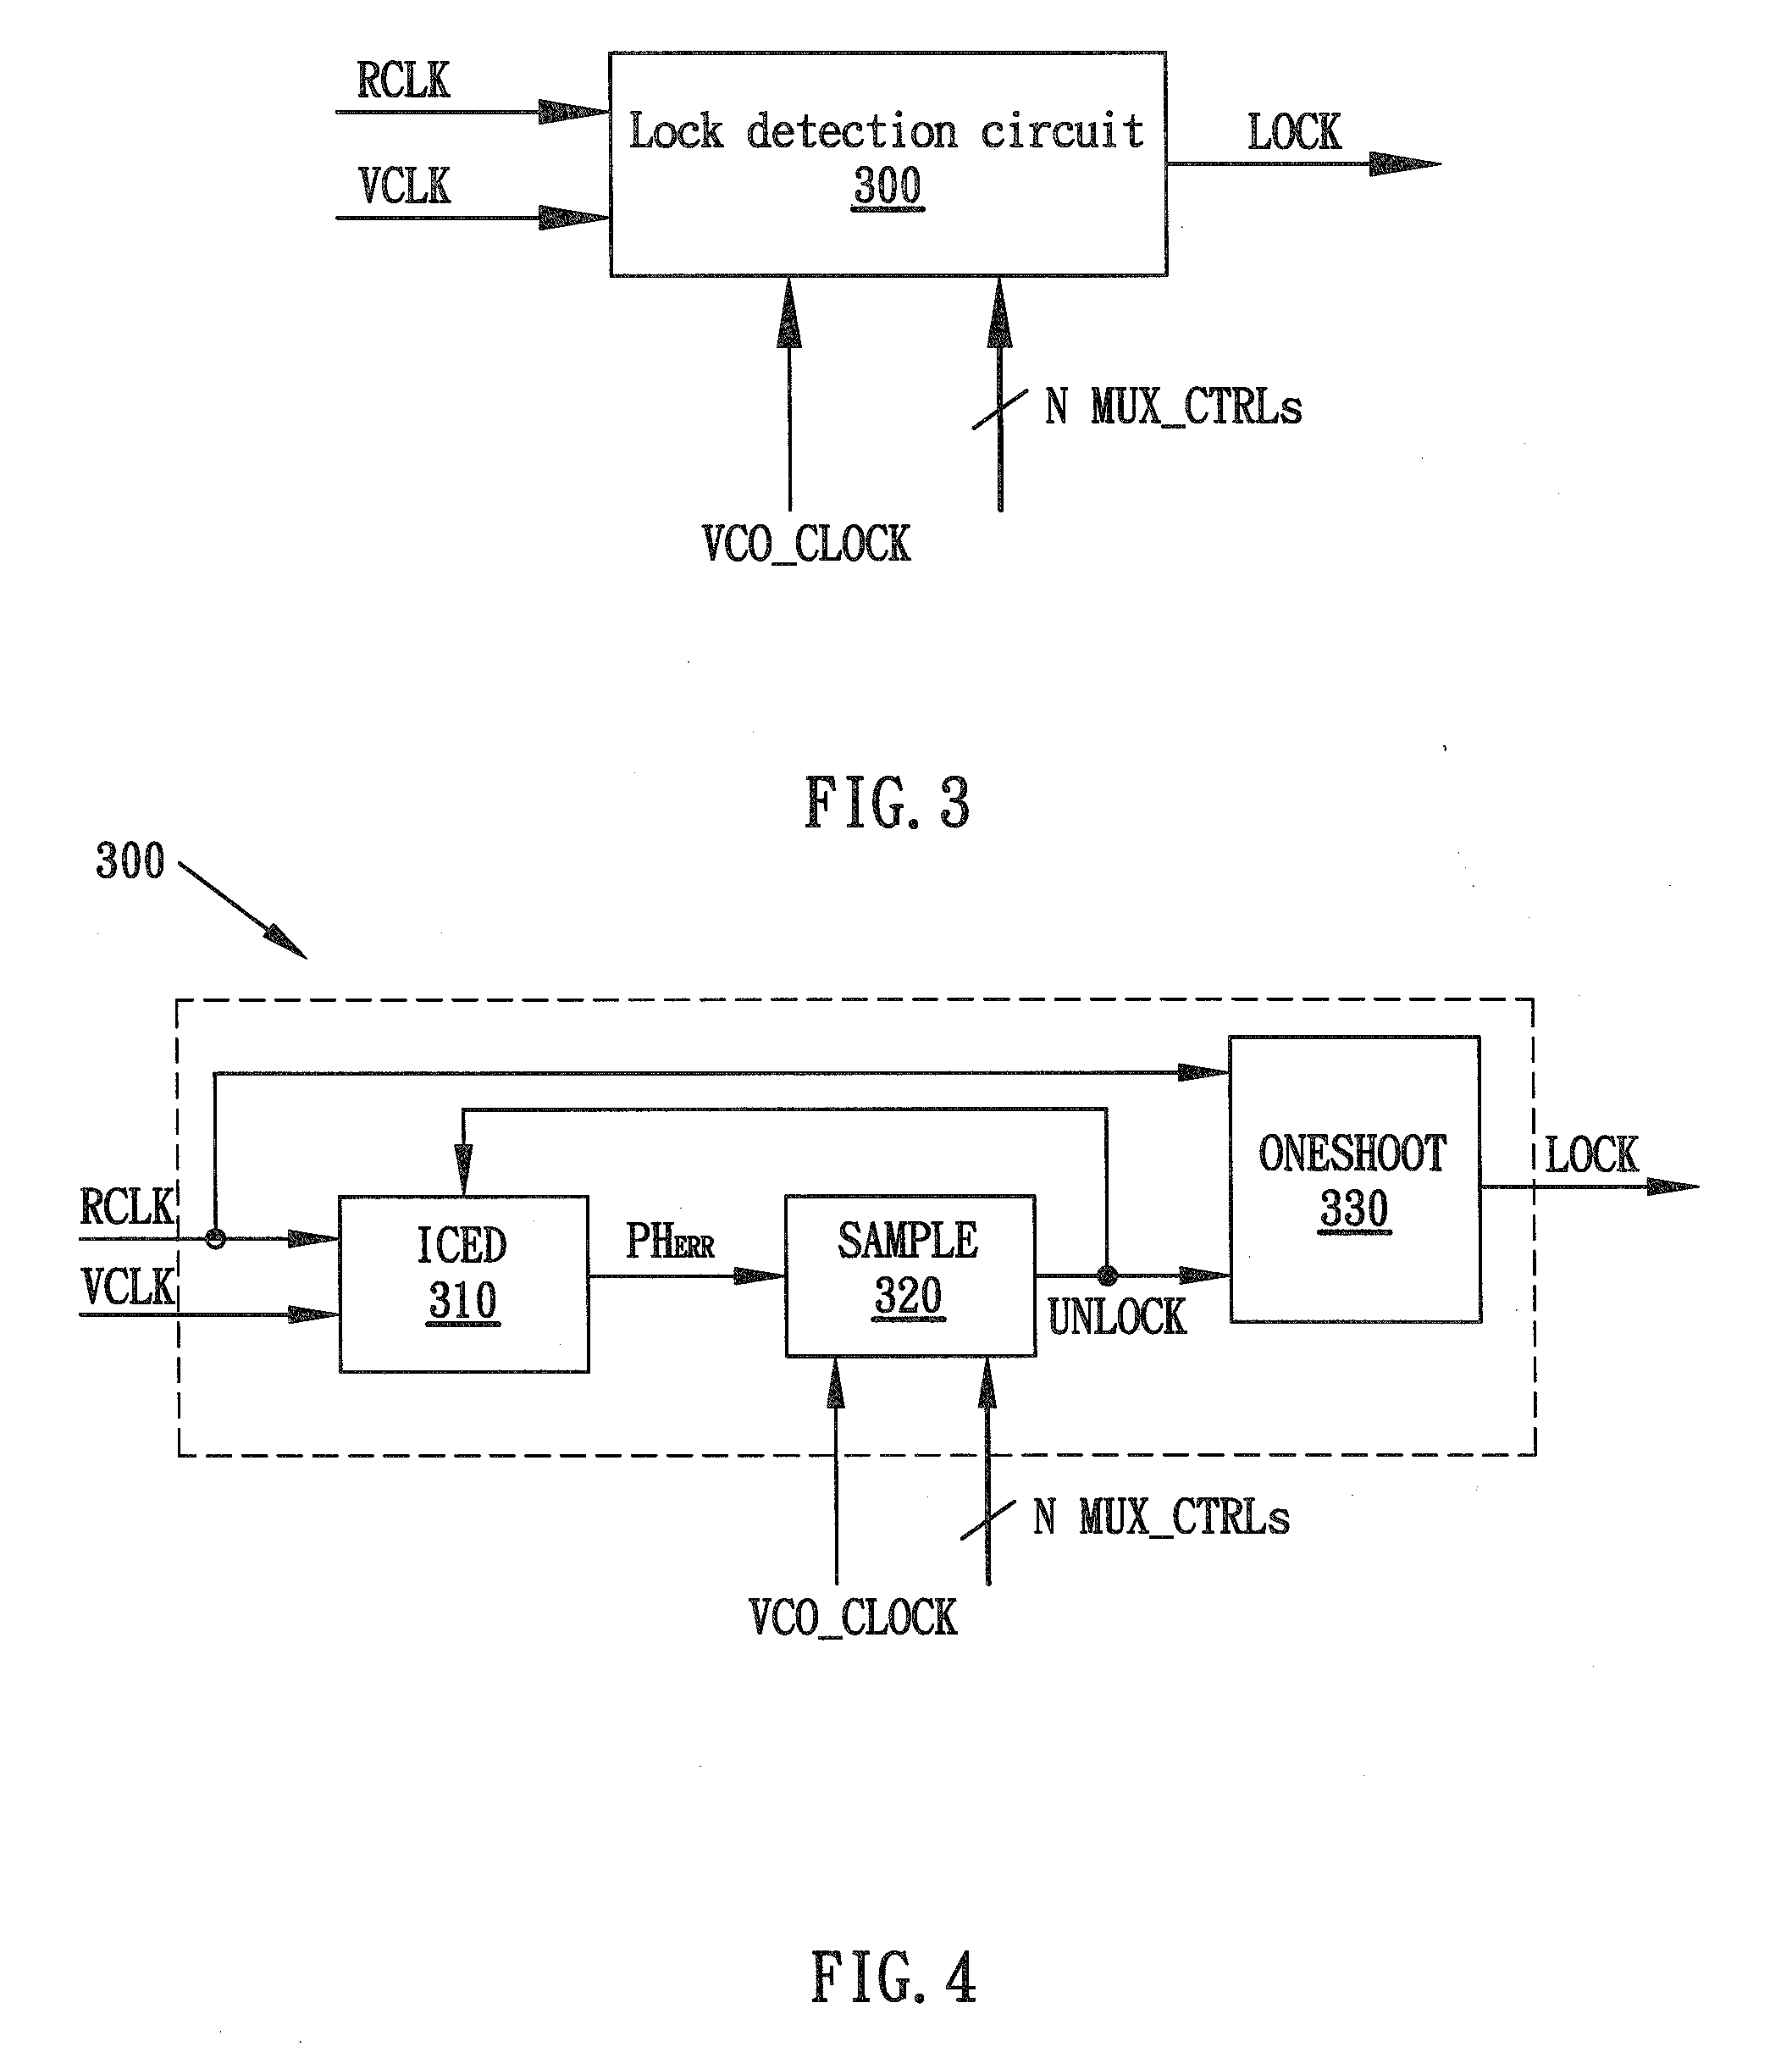 Lock detection circuit and method for phase locked loop system